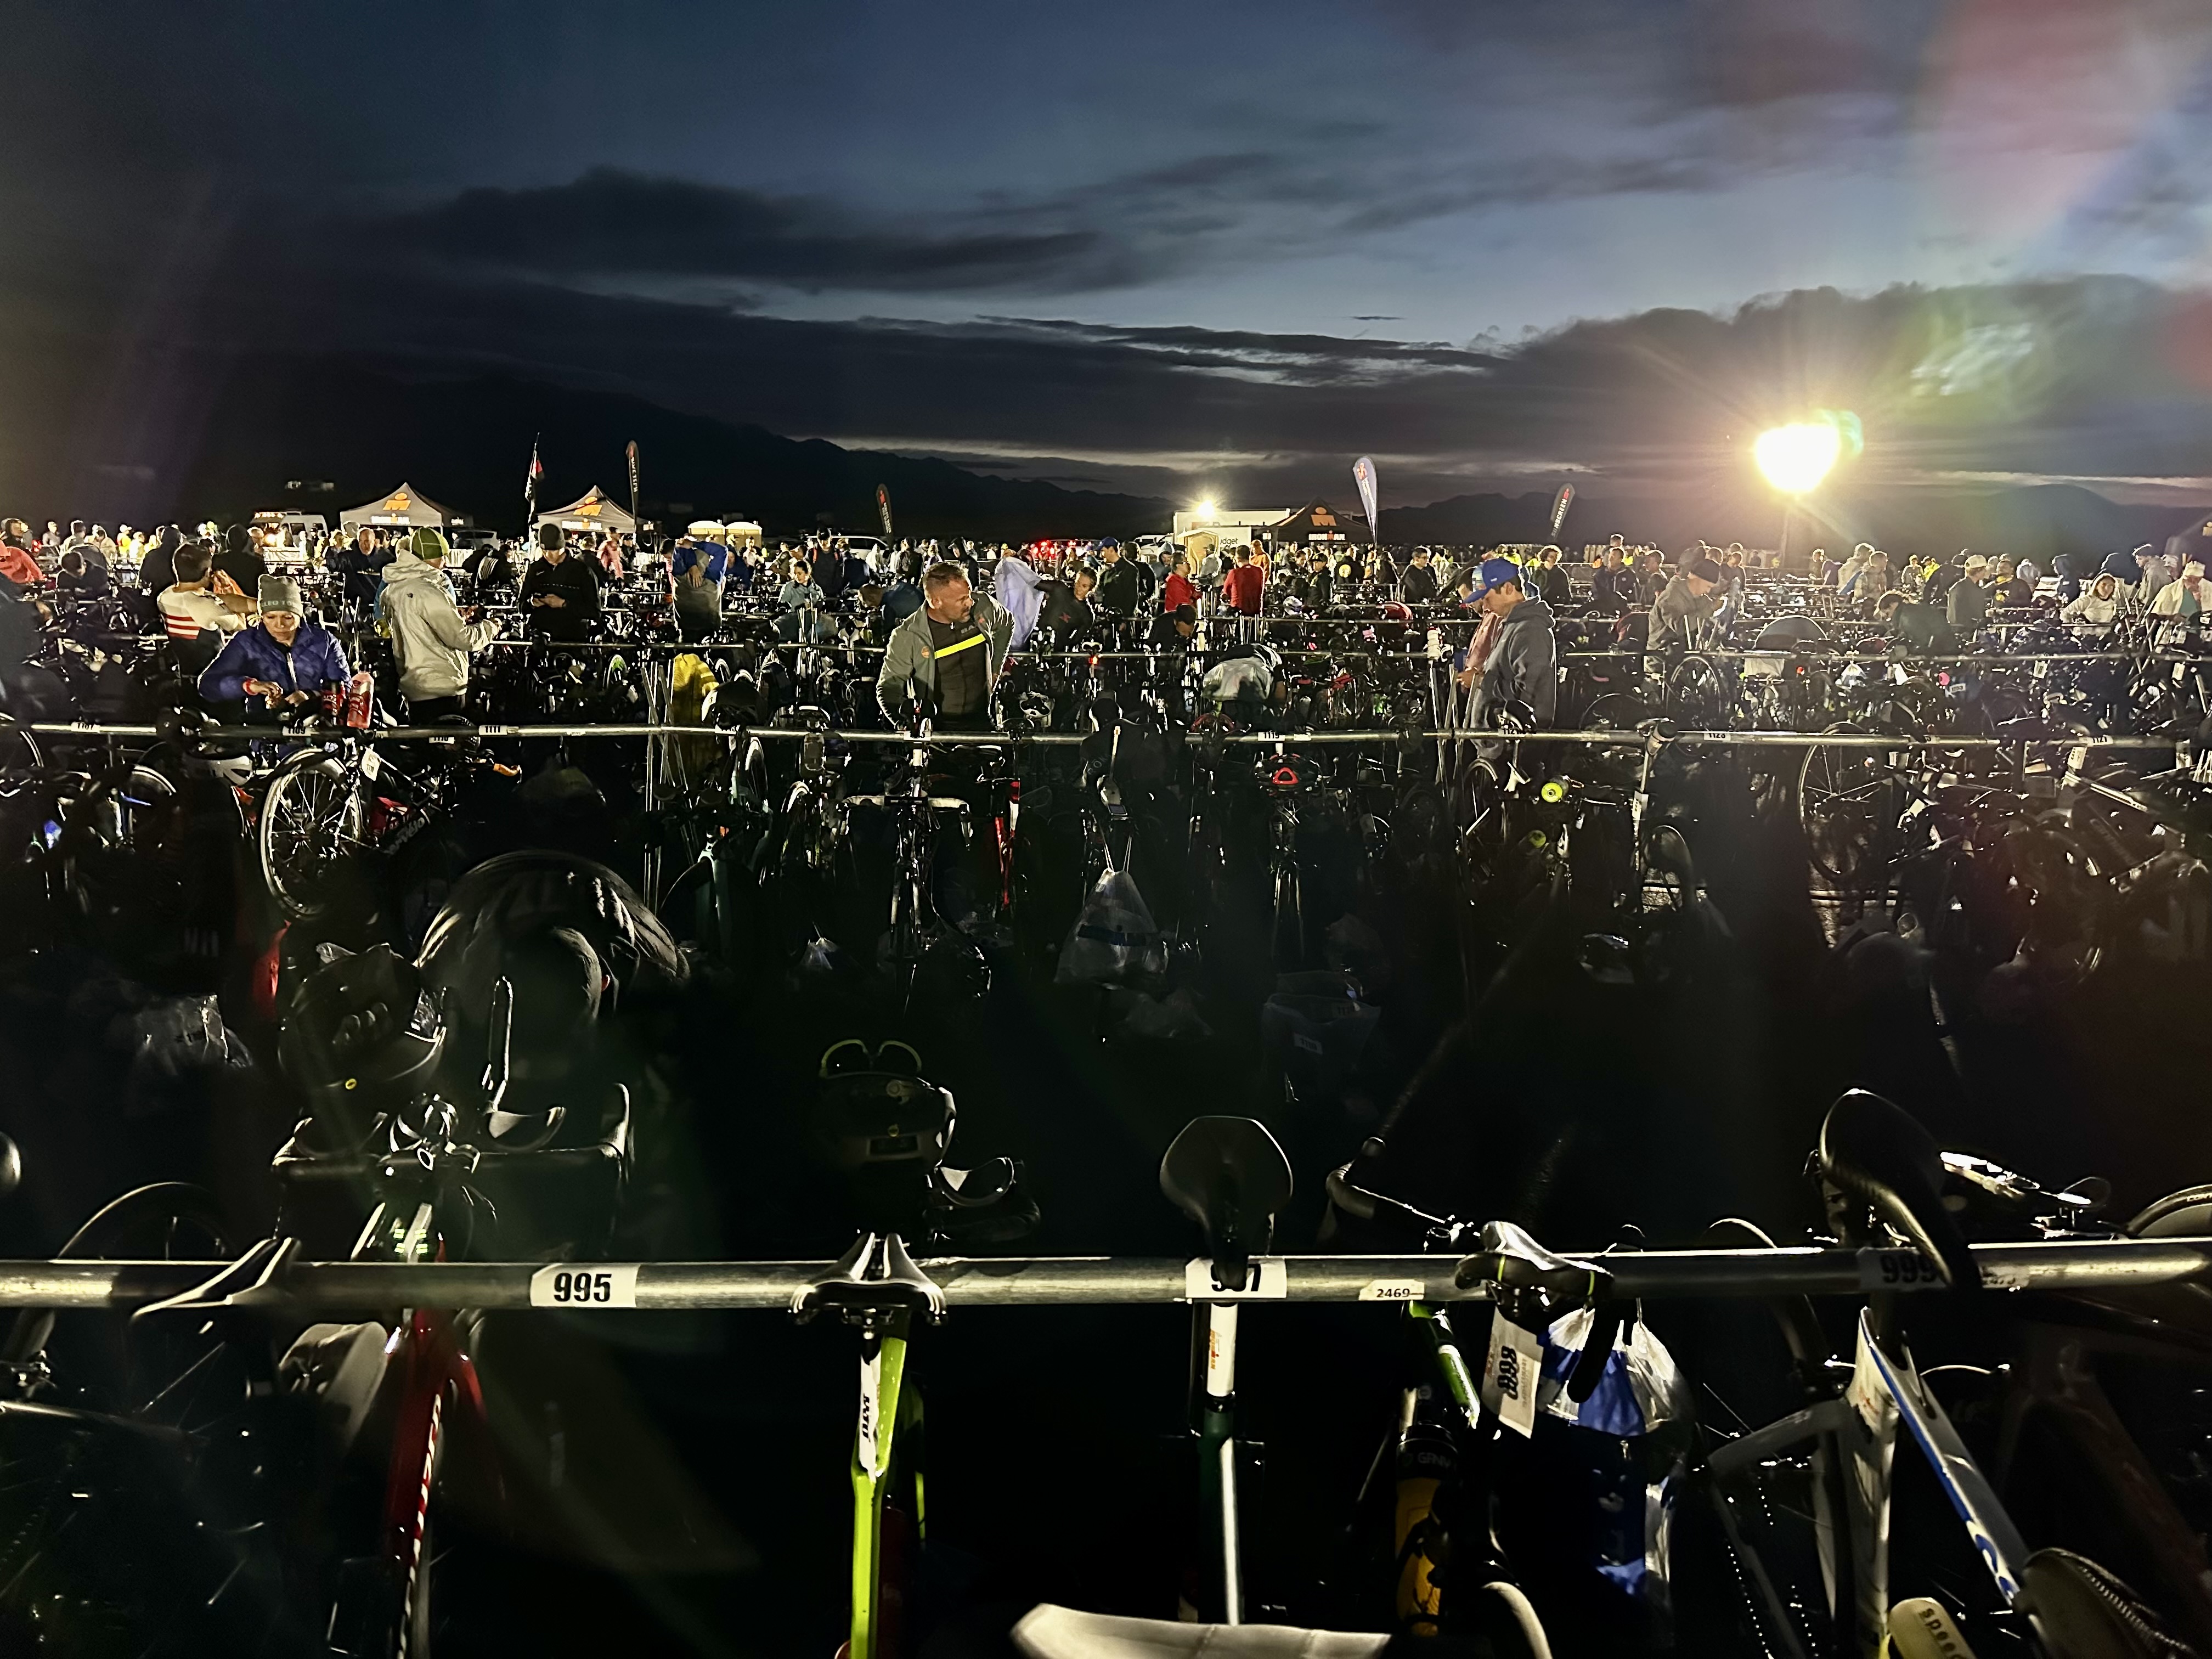 The T1 transition area for Ironman 70.3 St. George in Sand Hollow State Park, shortly before dawn. The racks with bikes can be seen, along with athletes setting up their gear before the swim.